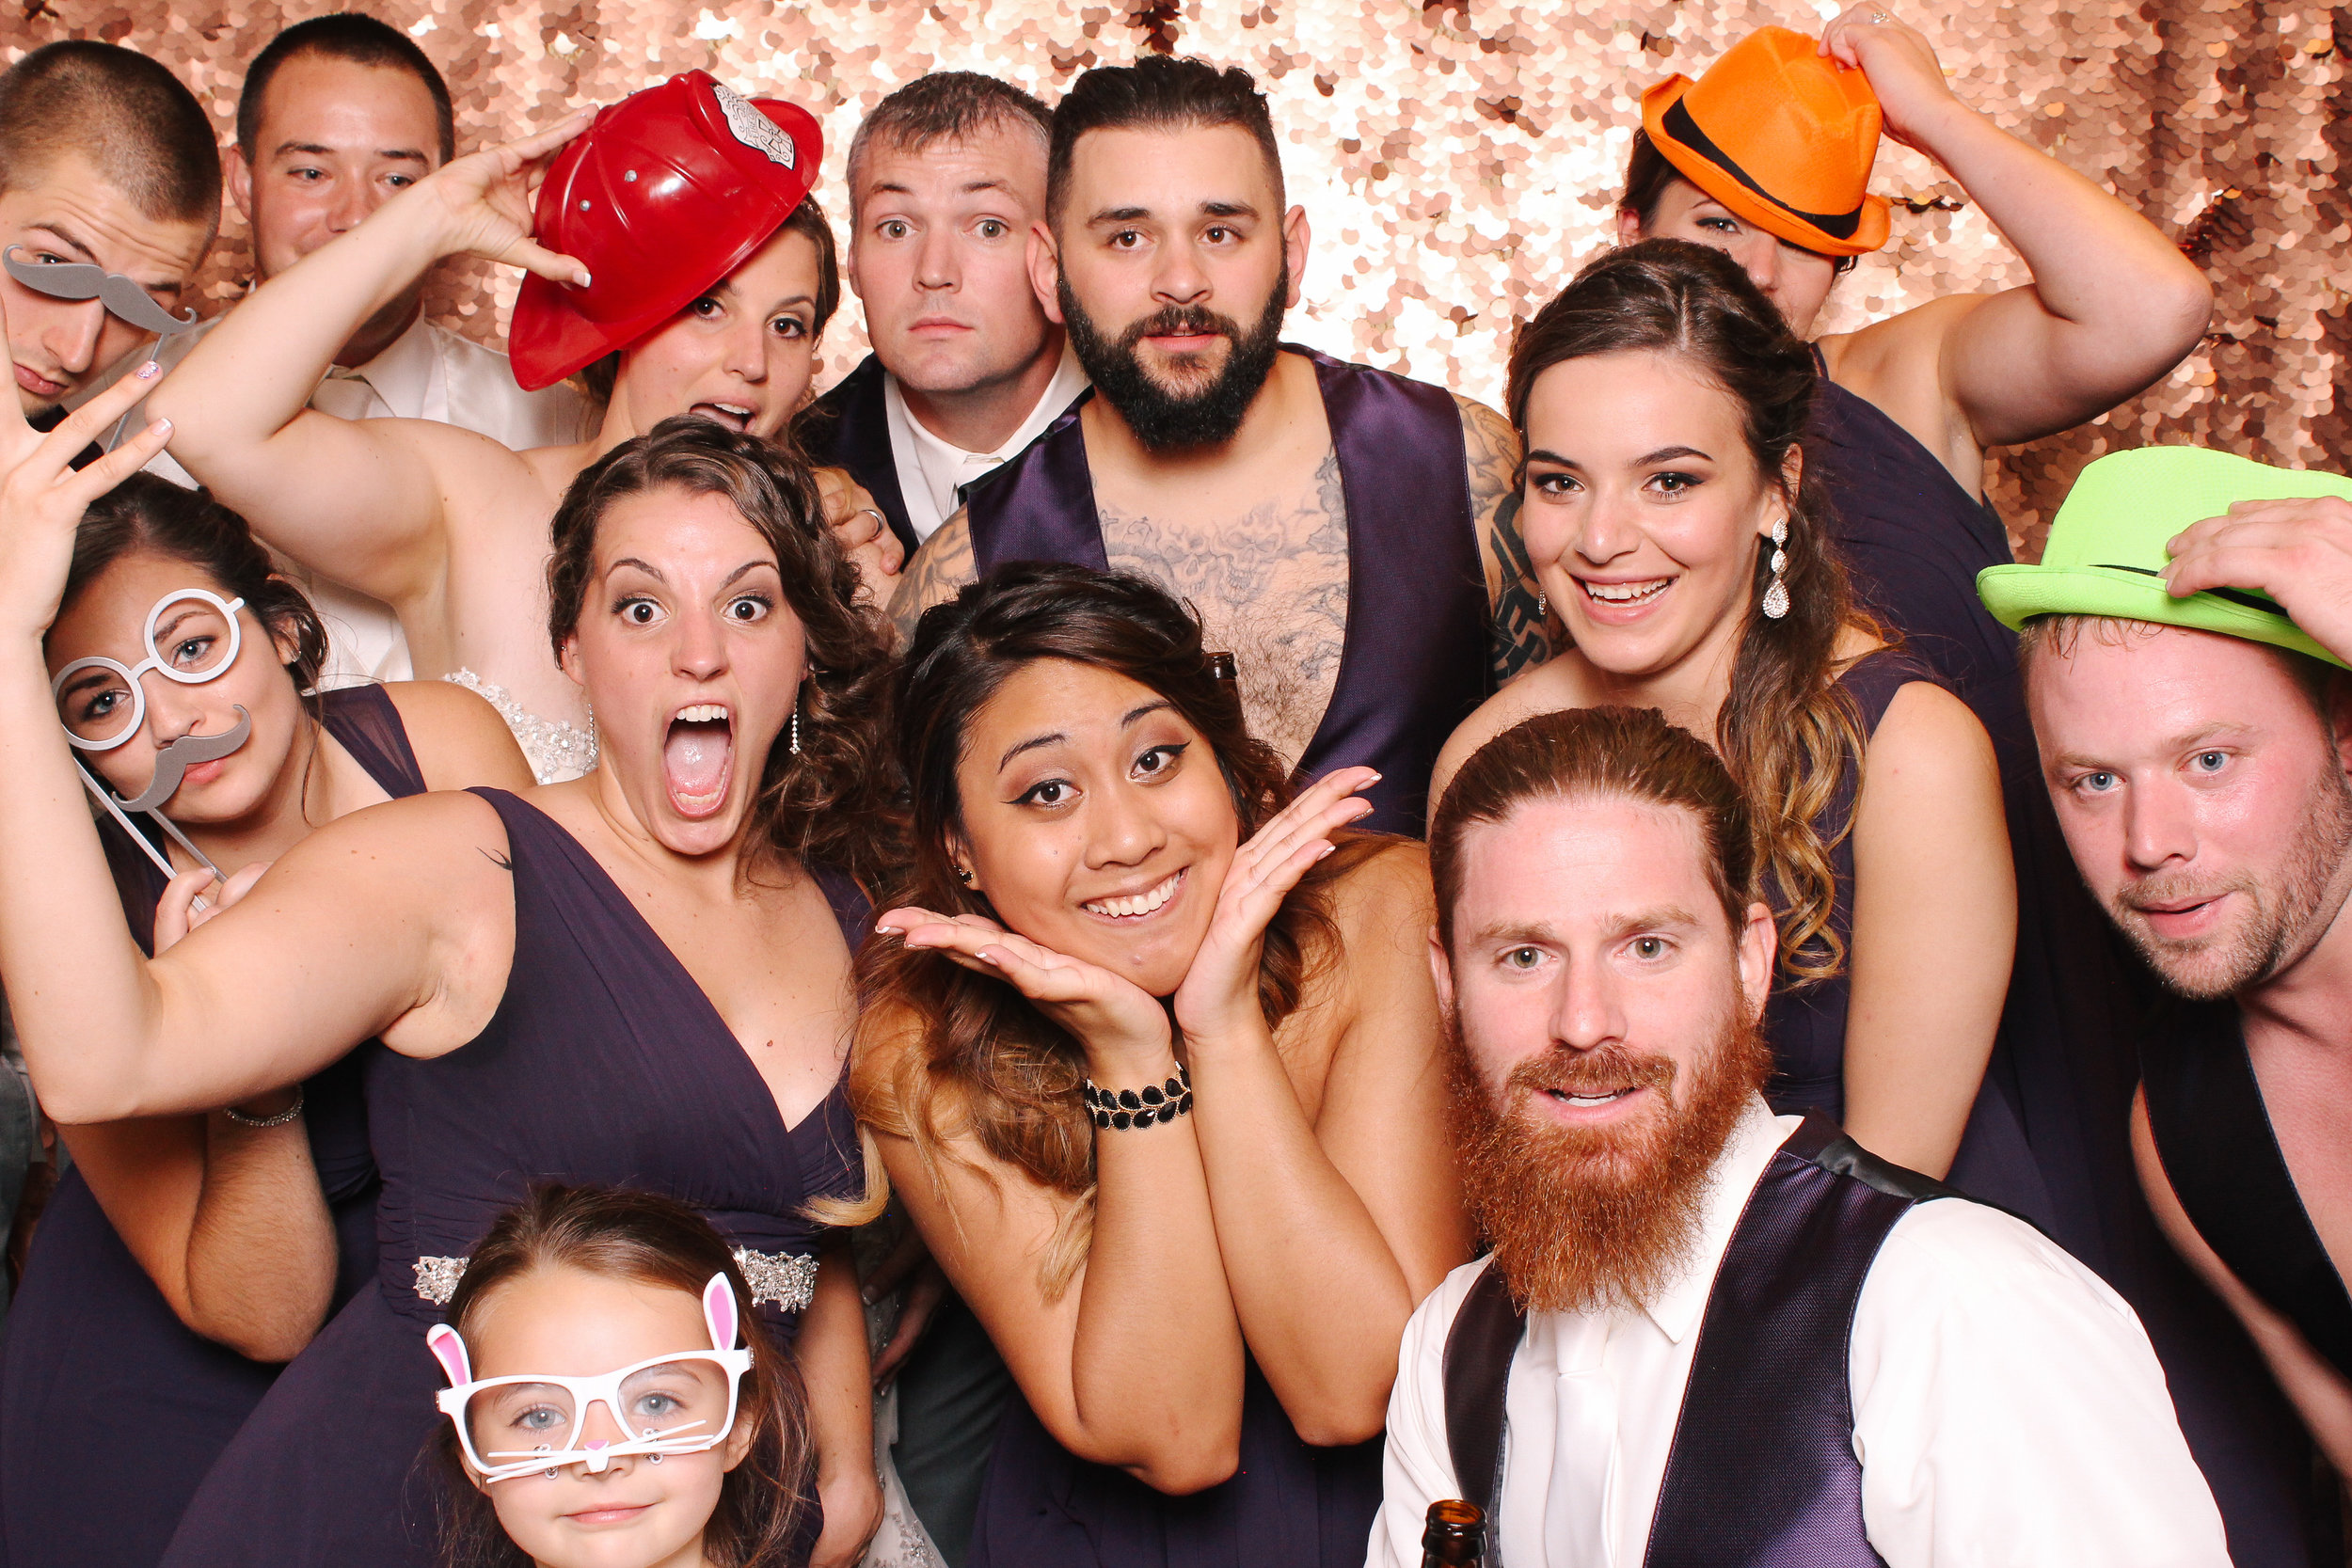 00263-metropolitan at the 9 photobooth too much awesomeness Cleveland Photobooth Company-20160924.jpg